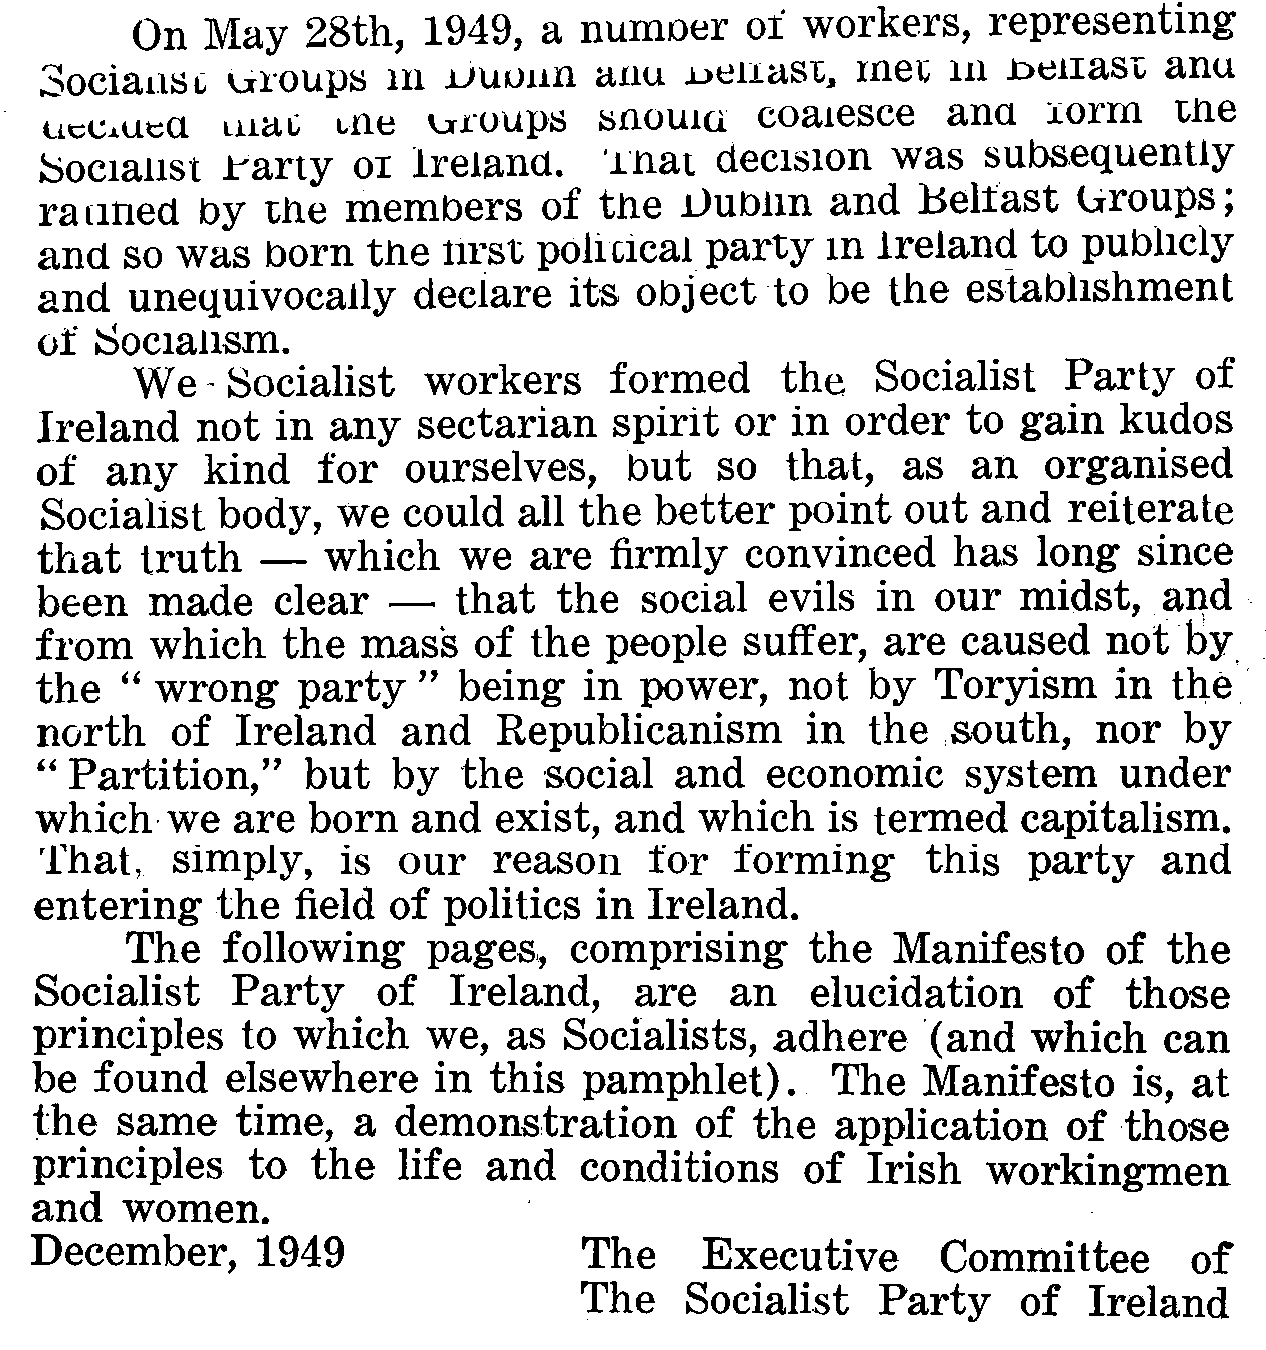 Scan of the preface to the Socialist Party of Ireland Manifesto (1949).